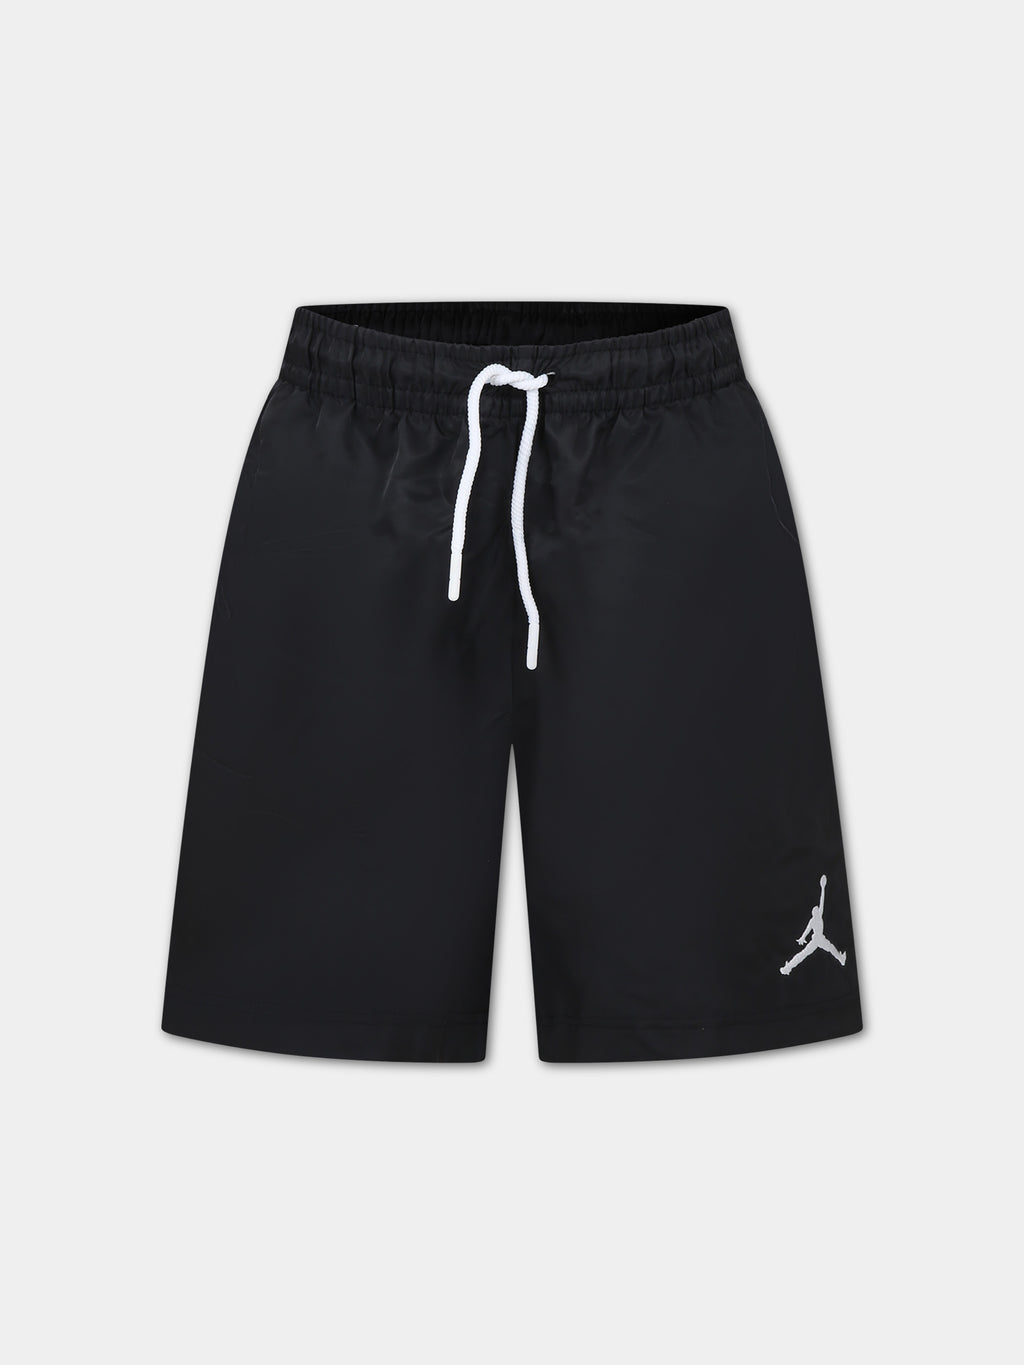 Black shorts for boy with iconic Jumpman